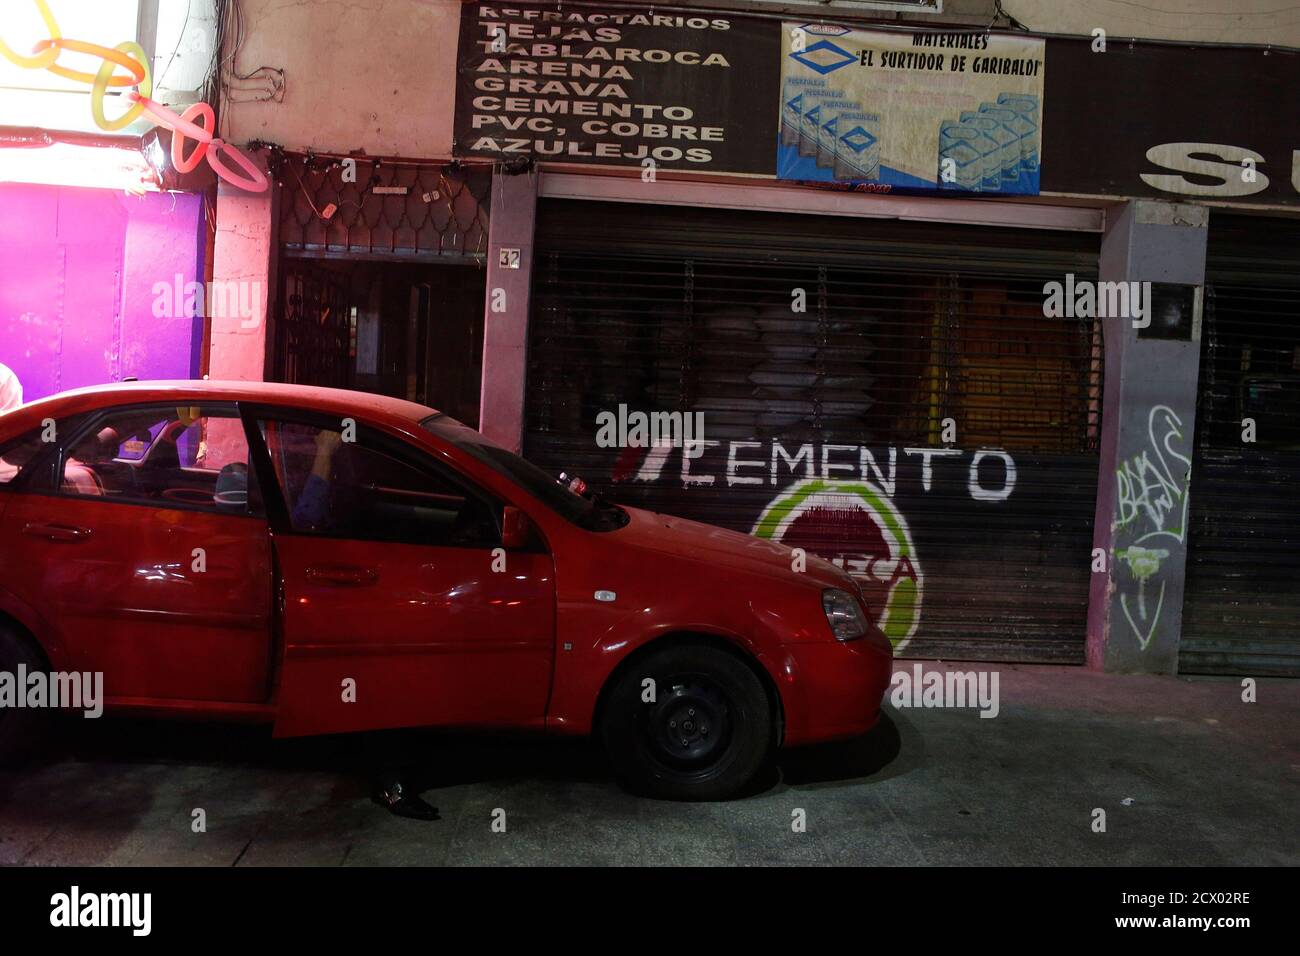 A police agent sits in his vehicle while keeping watch at the entrance of the Palace bar at Plaza Garibaldi in Mexico City May 10, 2013. Malcolm Shabazz was beaten to death early on Thursday morning, police say, in an ignominious end to a short, tormented life flecked with tragedy. Shabazz, the grandson of murdered U.S. civil rights leader Malcolm X, who police say was 29, was visiting Mexico City to visit an immigration activist friend Miguel Suarez who was recently deported from the United States, and to support his cause. On Wednesday night, the pair visited the run-down area around Plaza G Stock Photo